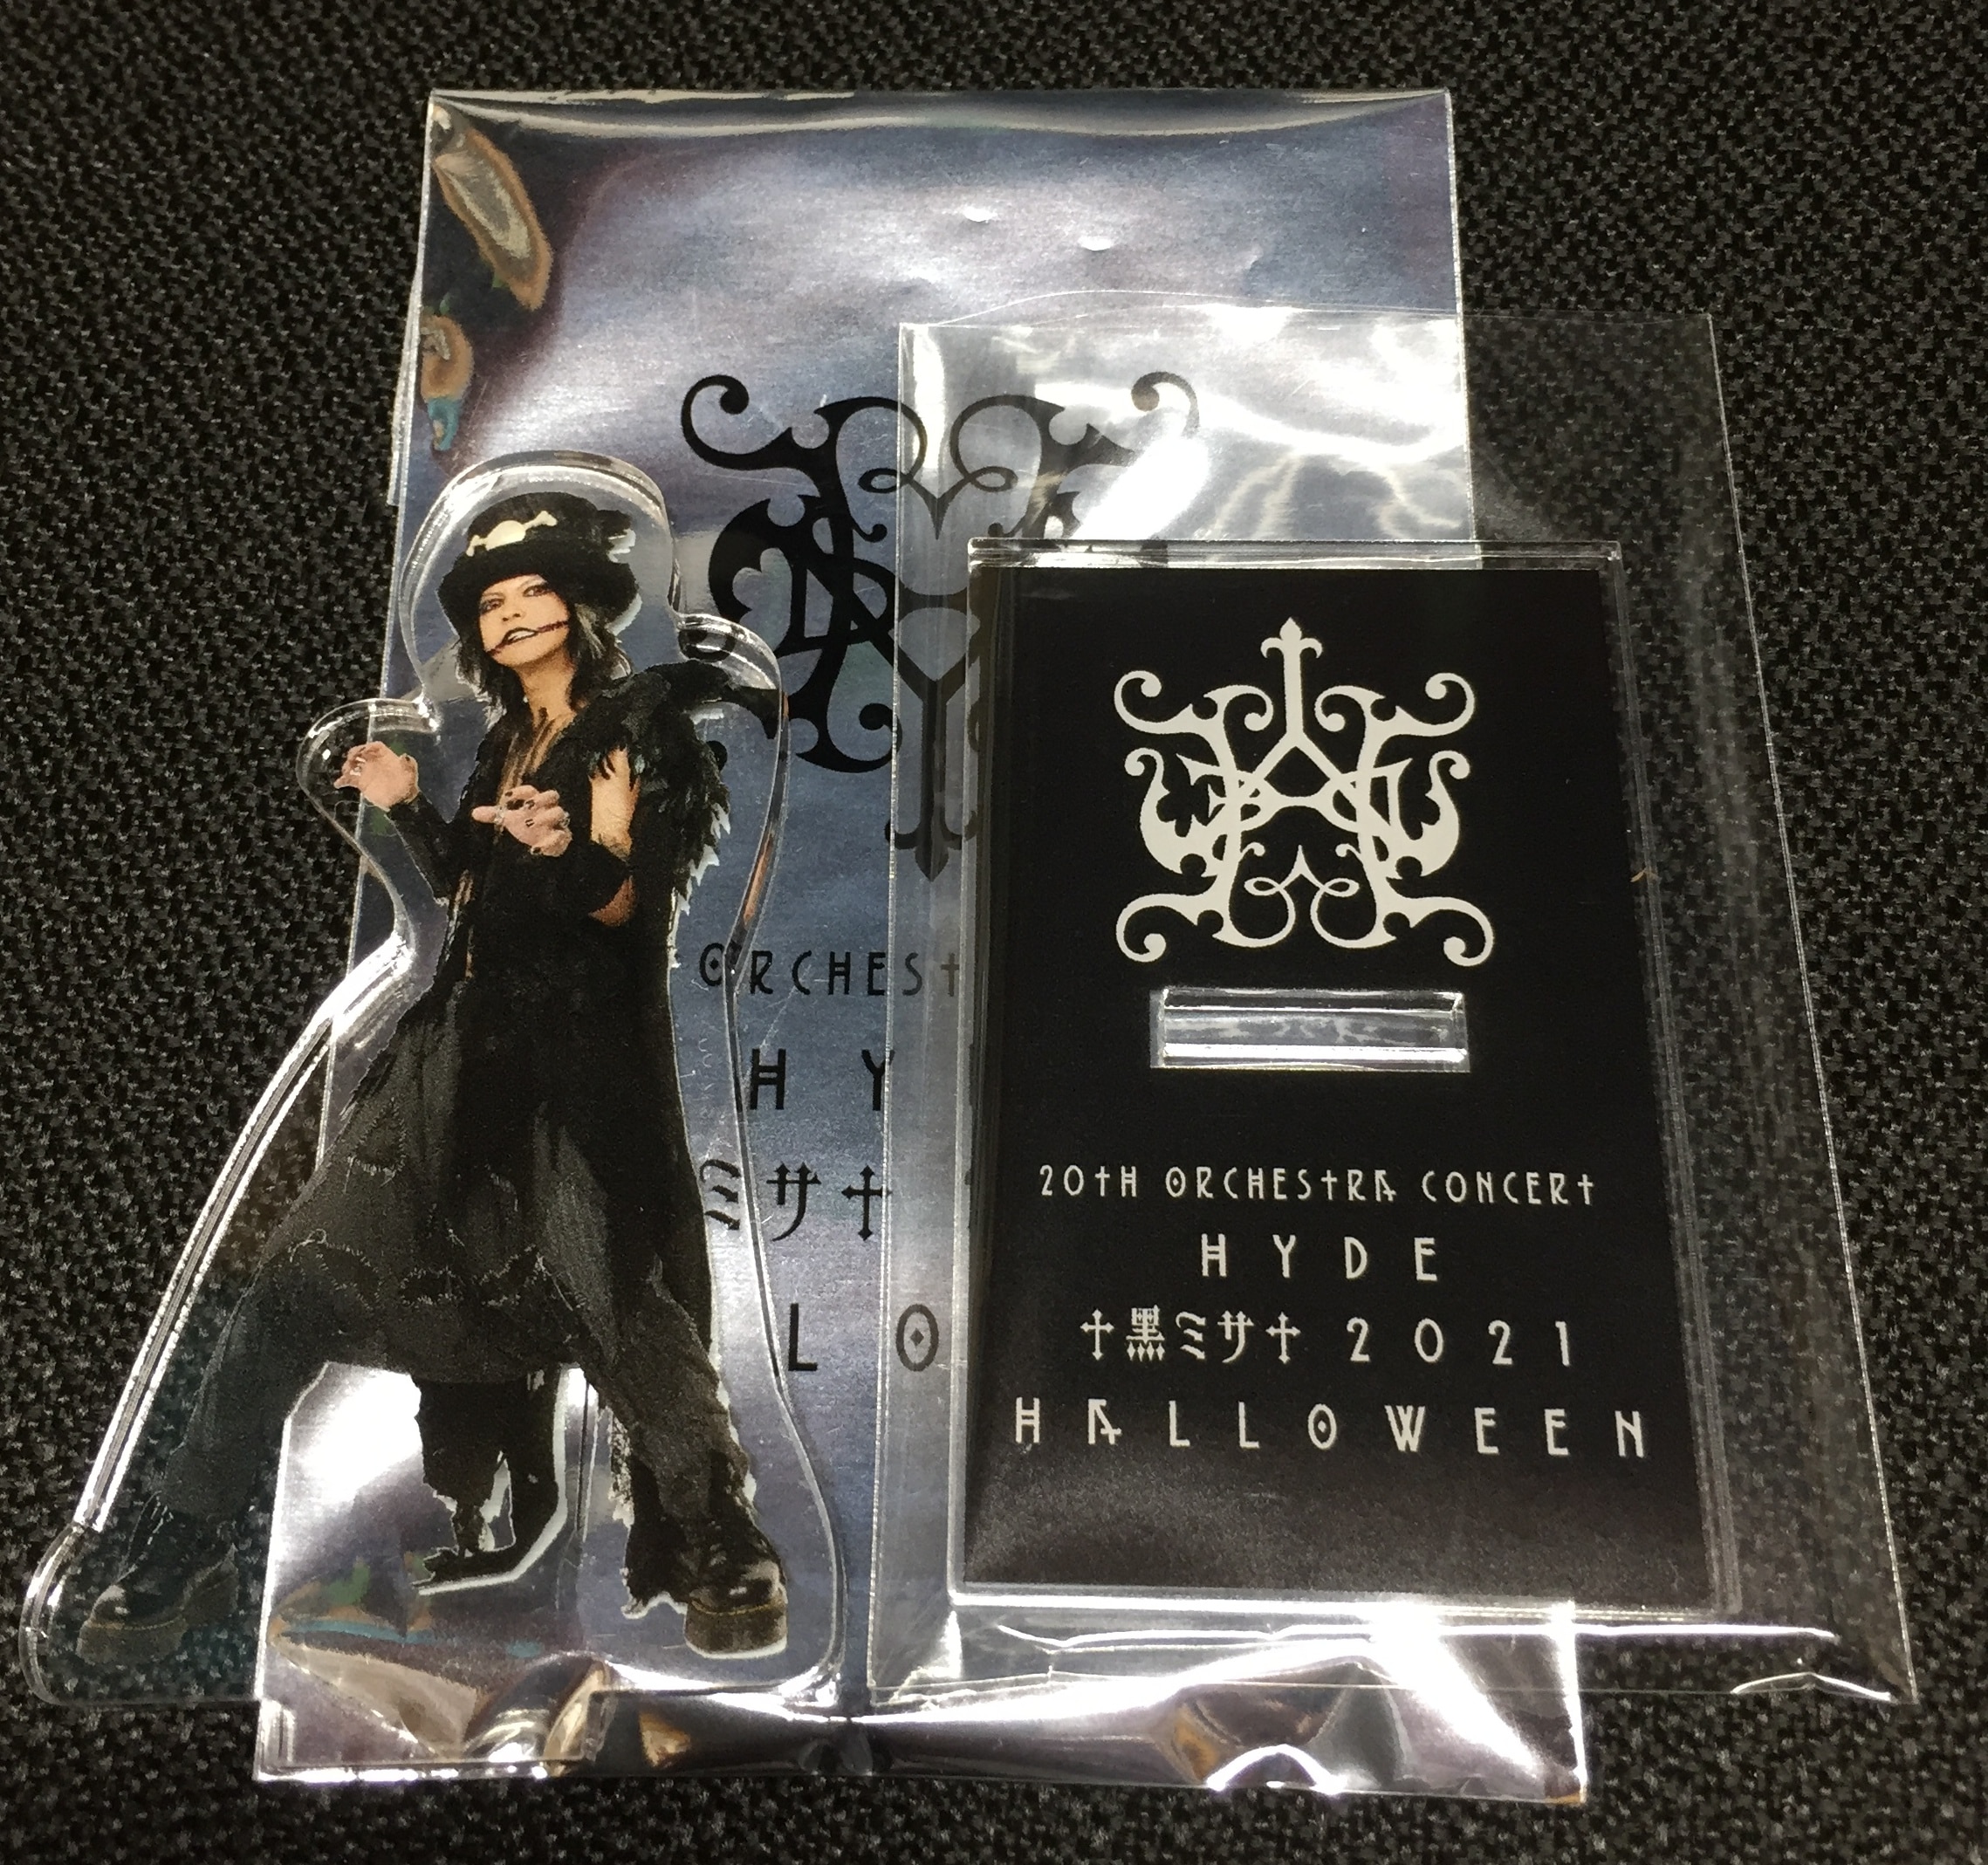 HYDE 20th Orchestra Concert HYDE 黒ミサ 2021 Halloween 歴代 HYDE